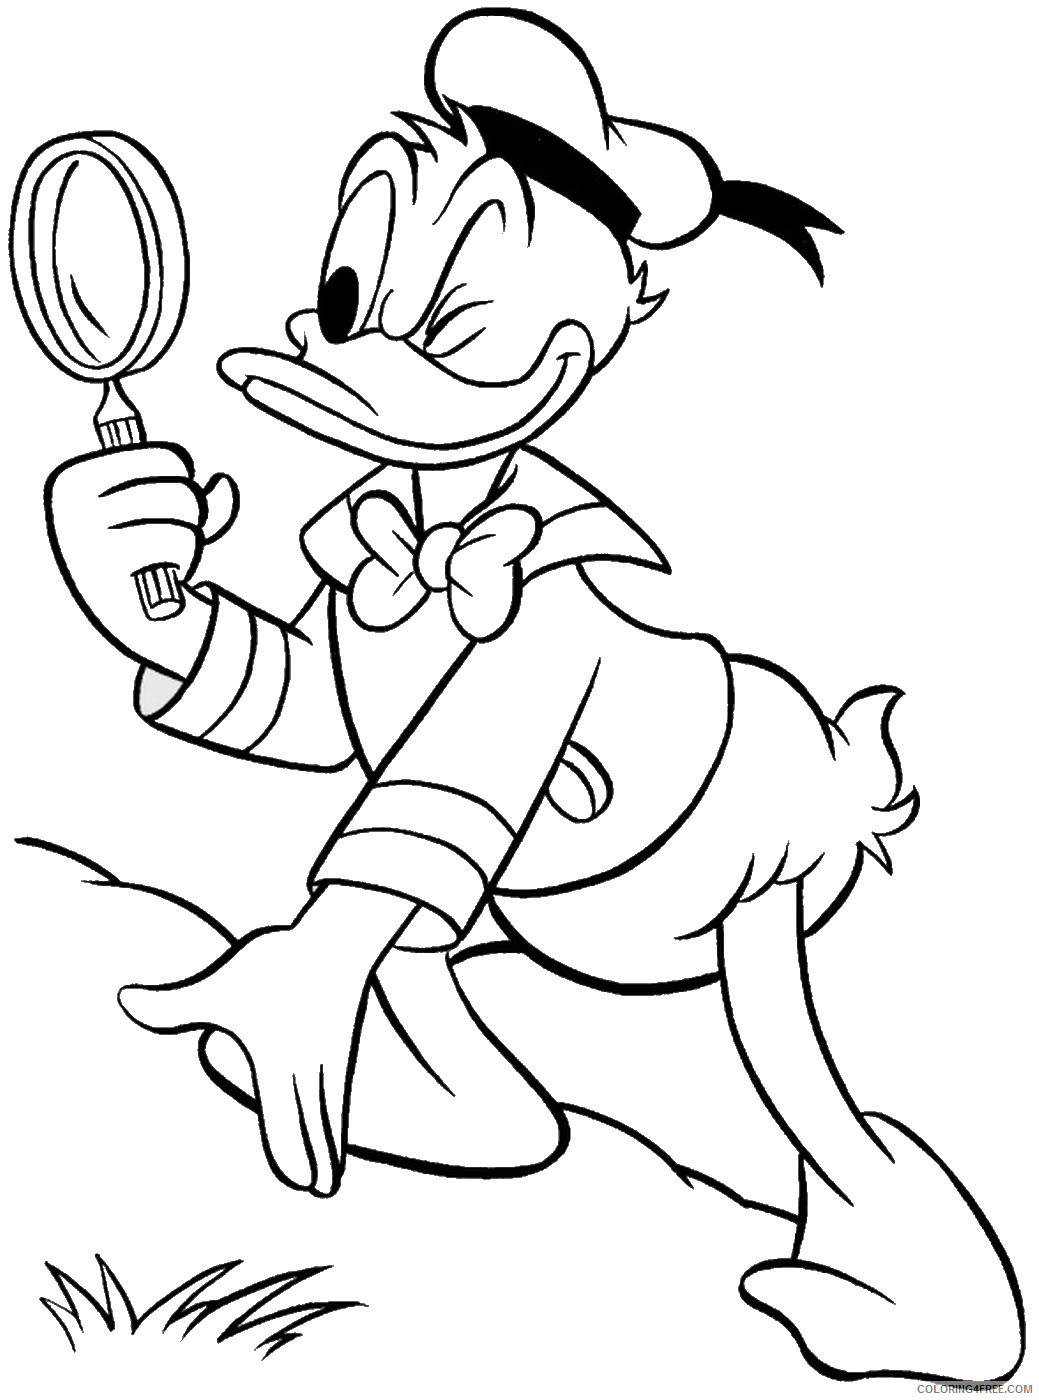 Donald Duck Coloring Pages Cartoons donald_37 Printable 2020 2520 Coloring4free